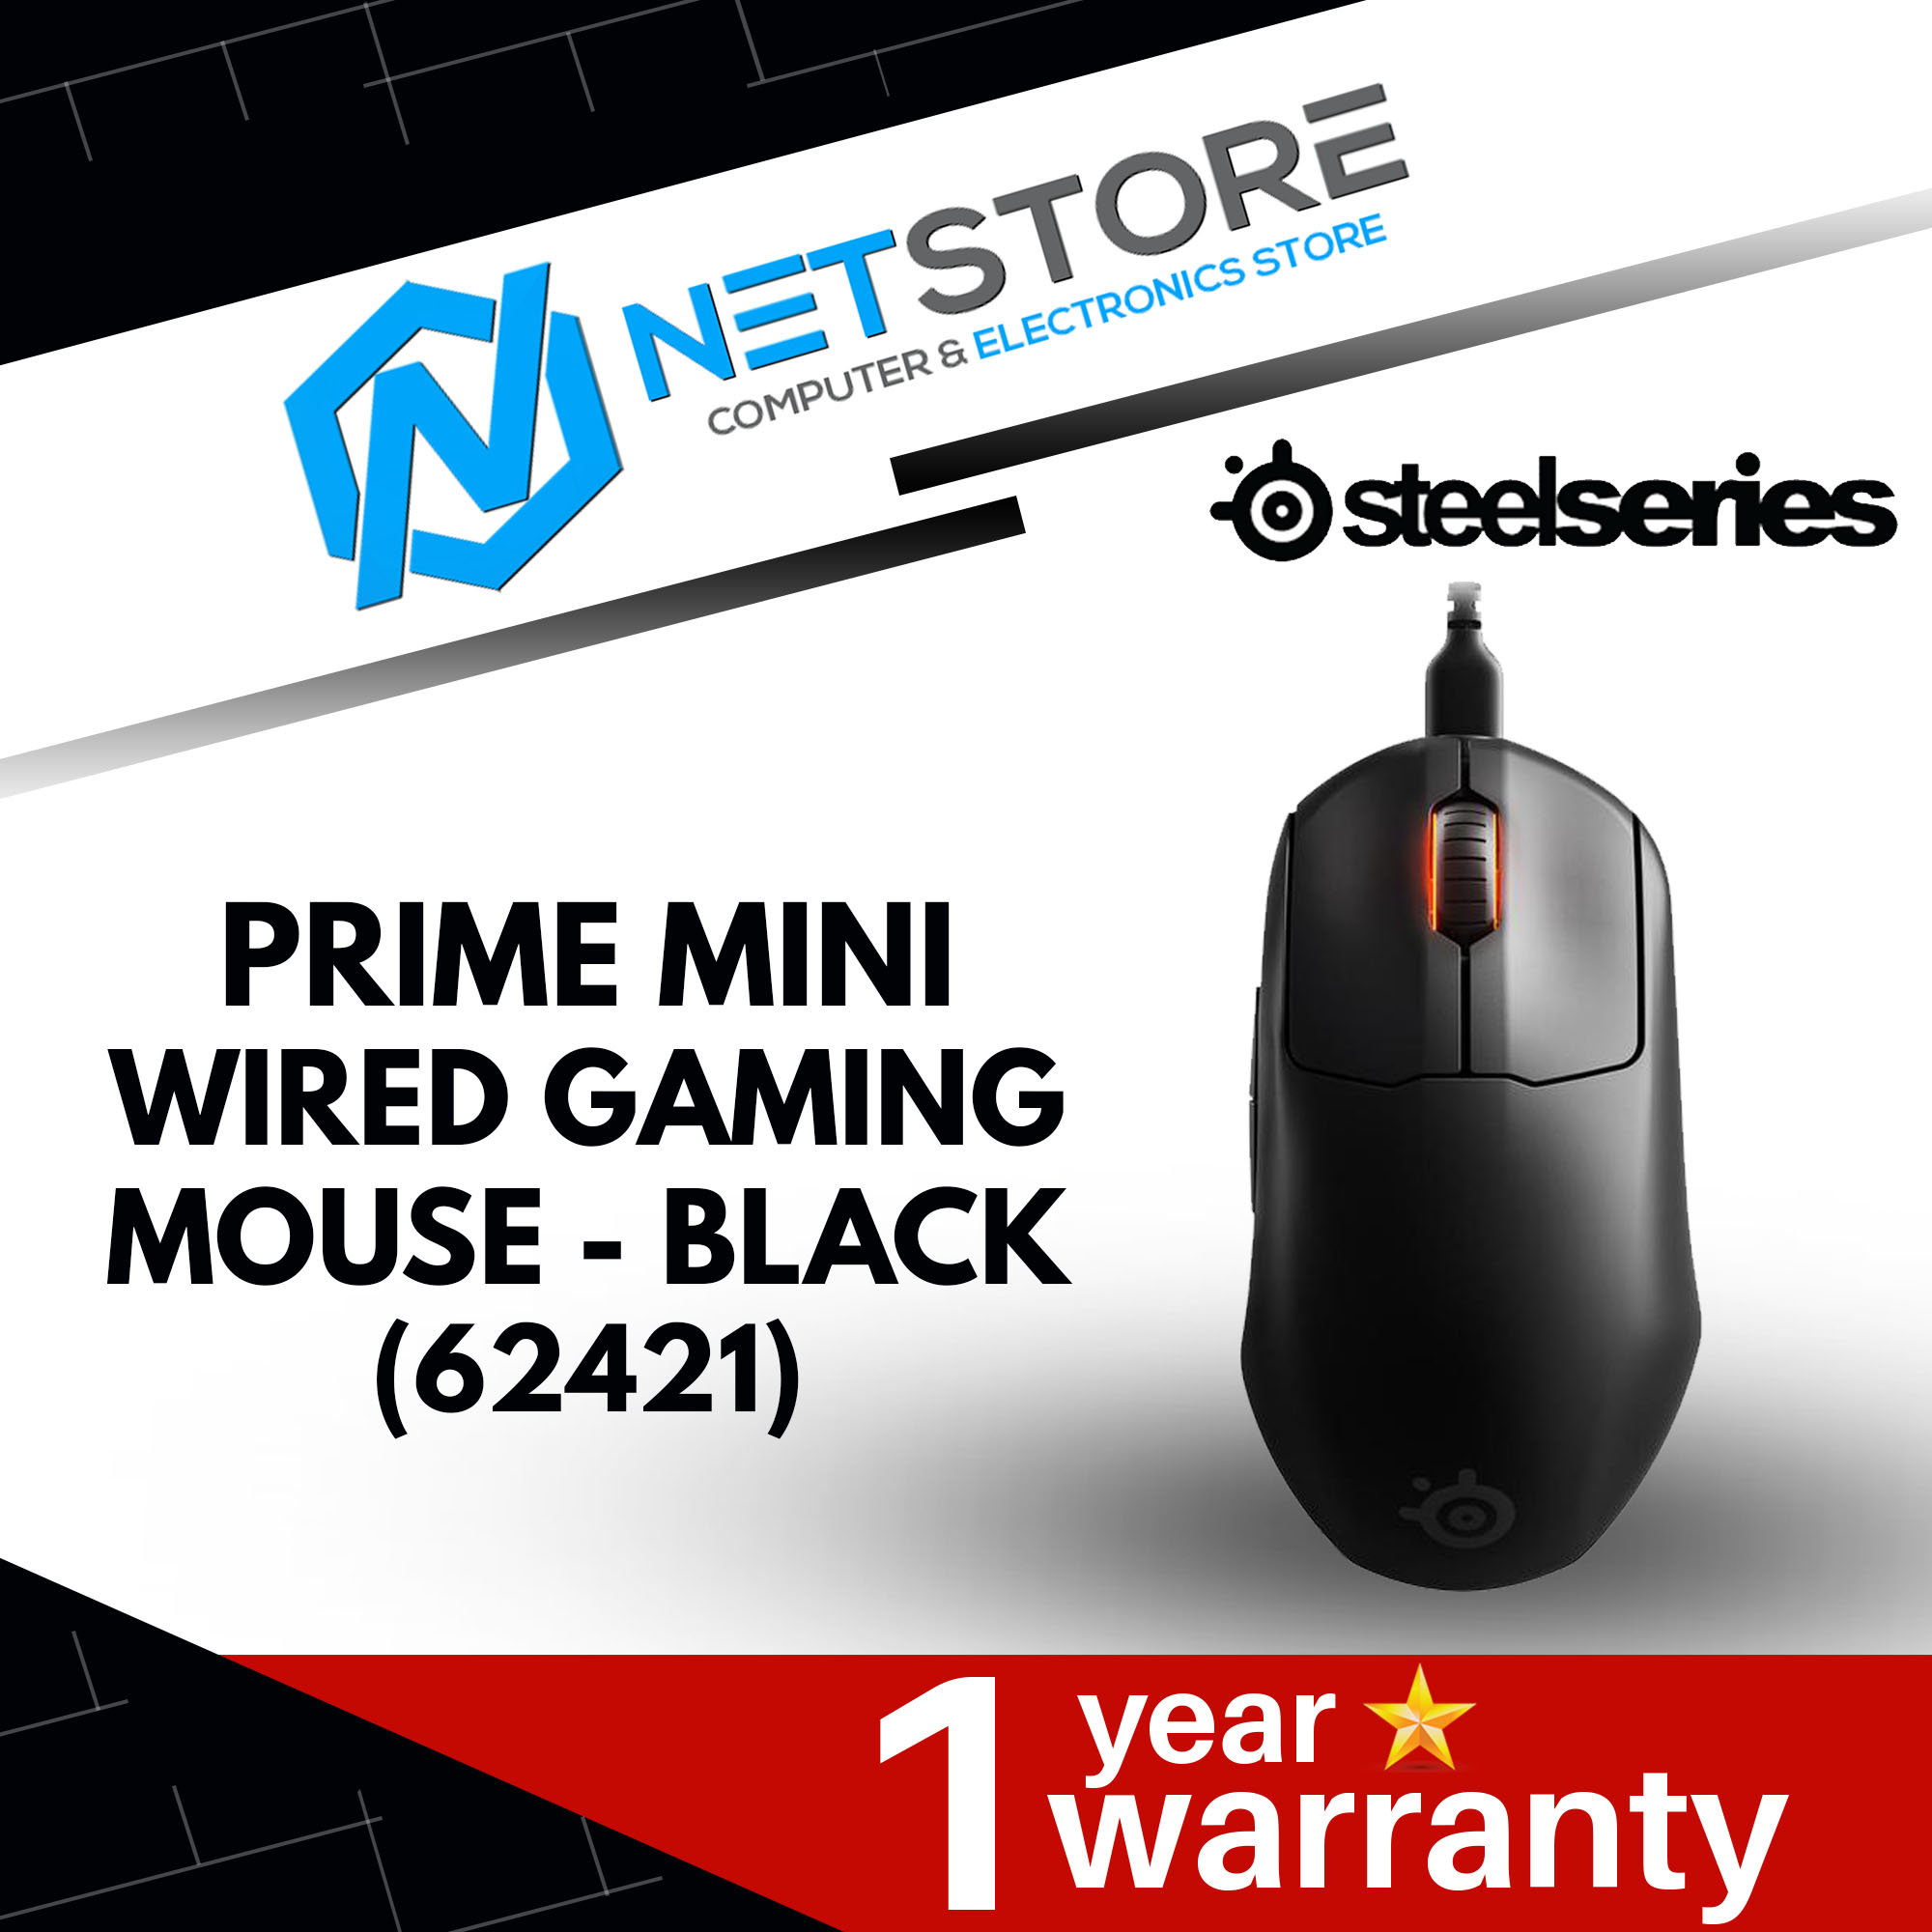 STEELSERIES PRIME MINI WIRED GAMING MOUSE - BLACK (62421)